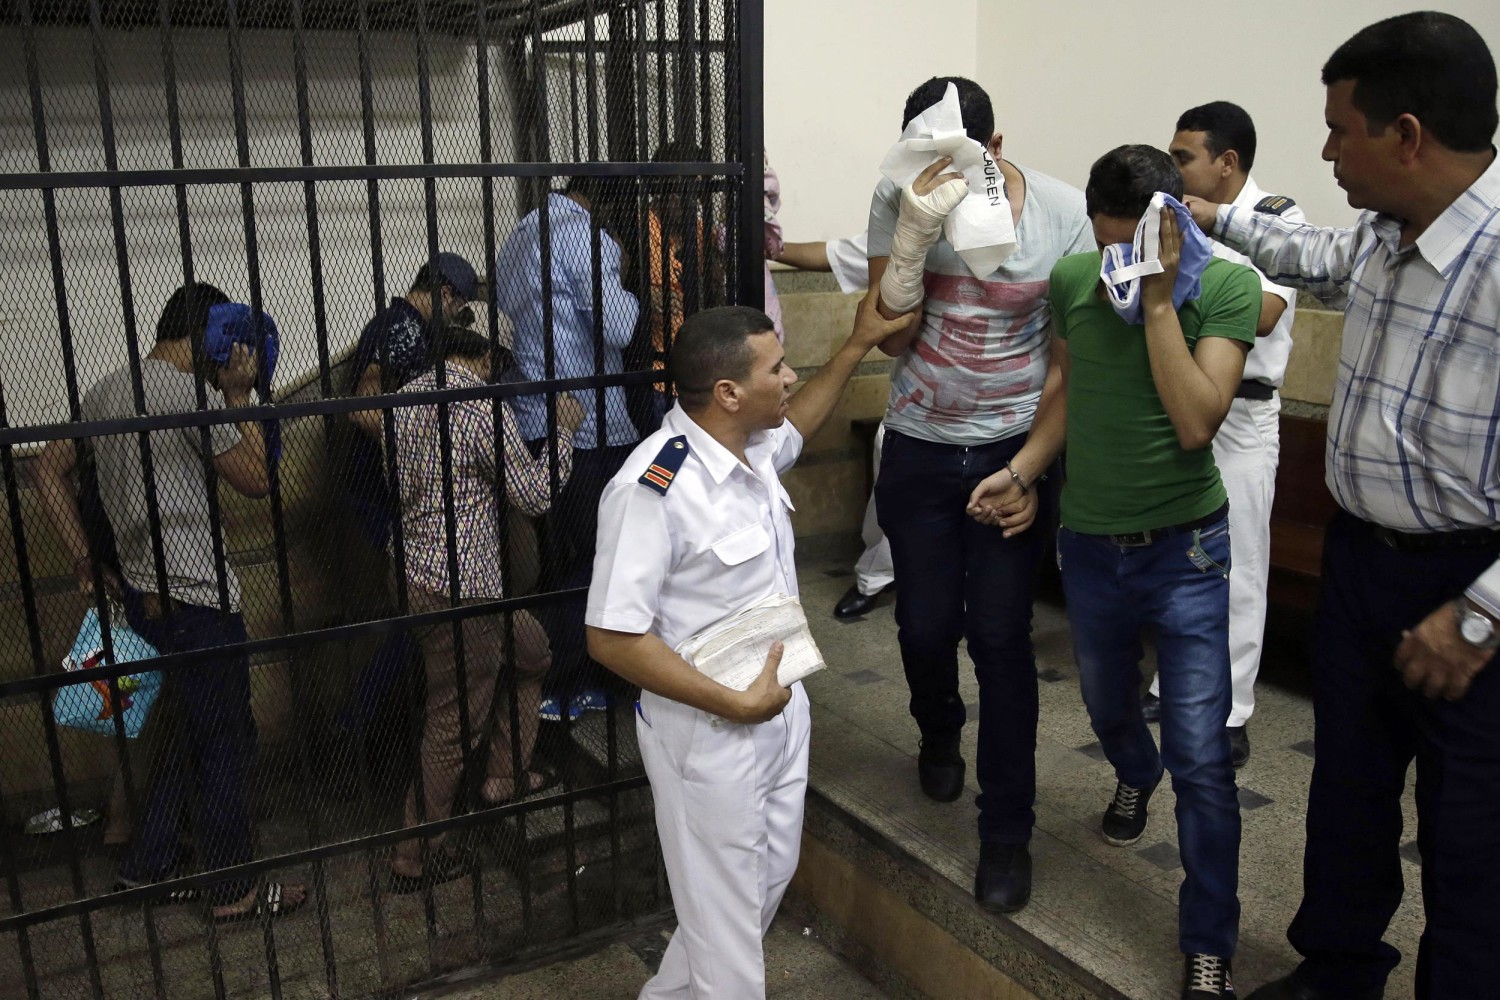 Eight Get Prison in Egypt for Alleged Gay Wedding